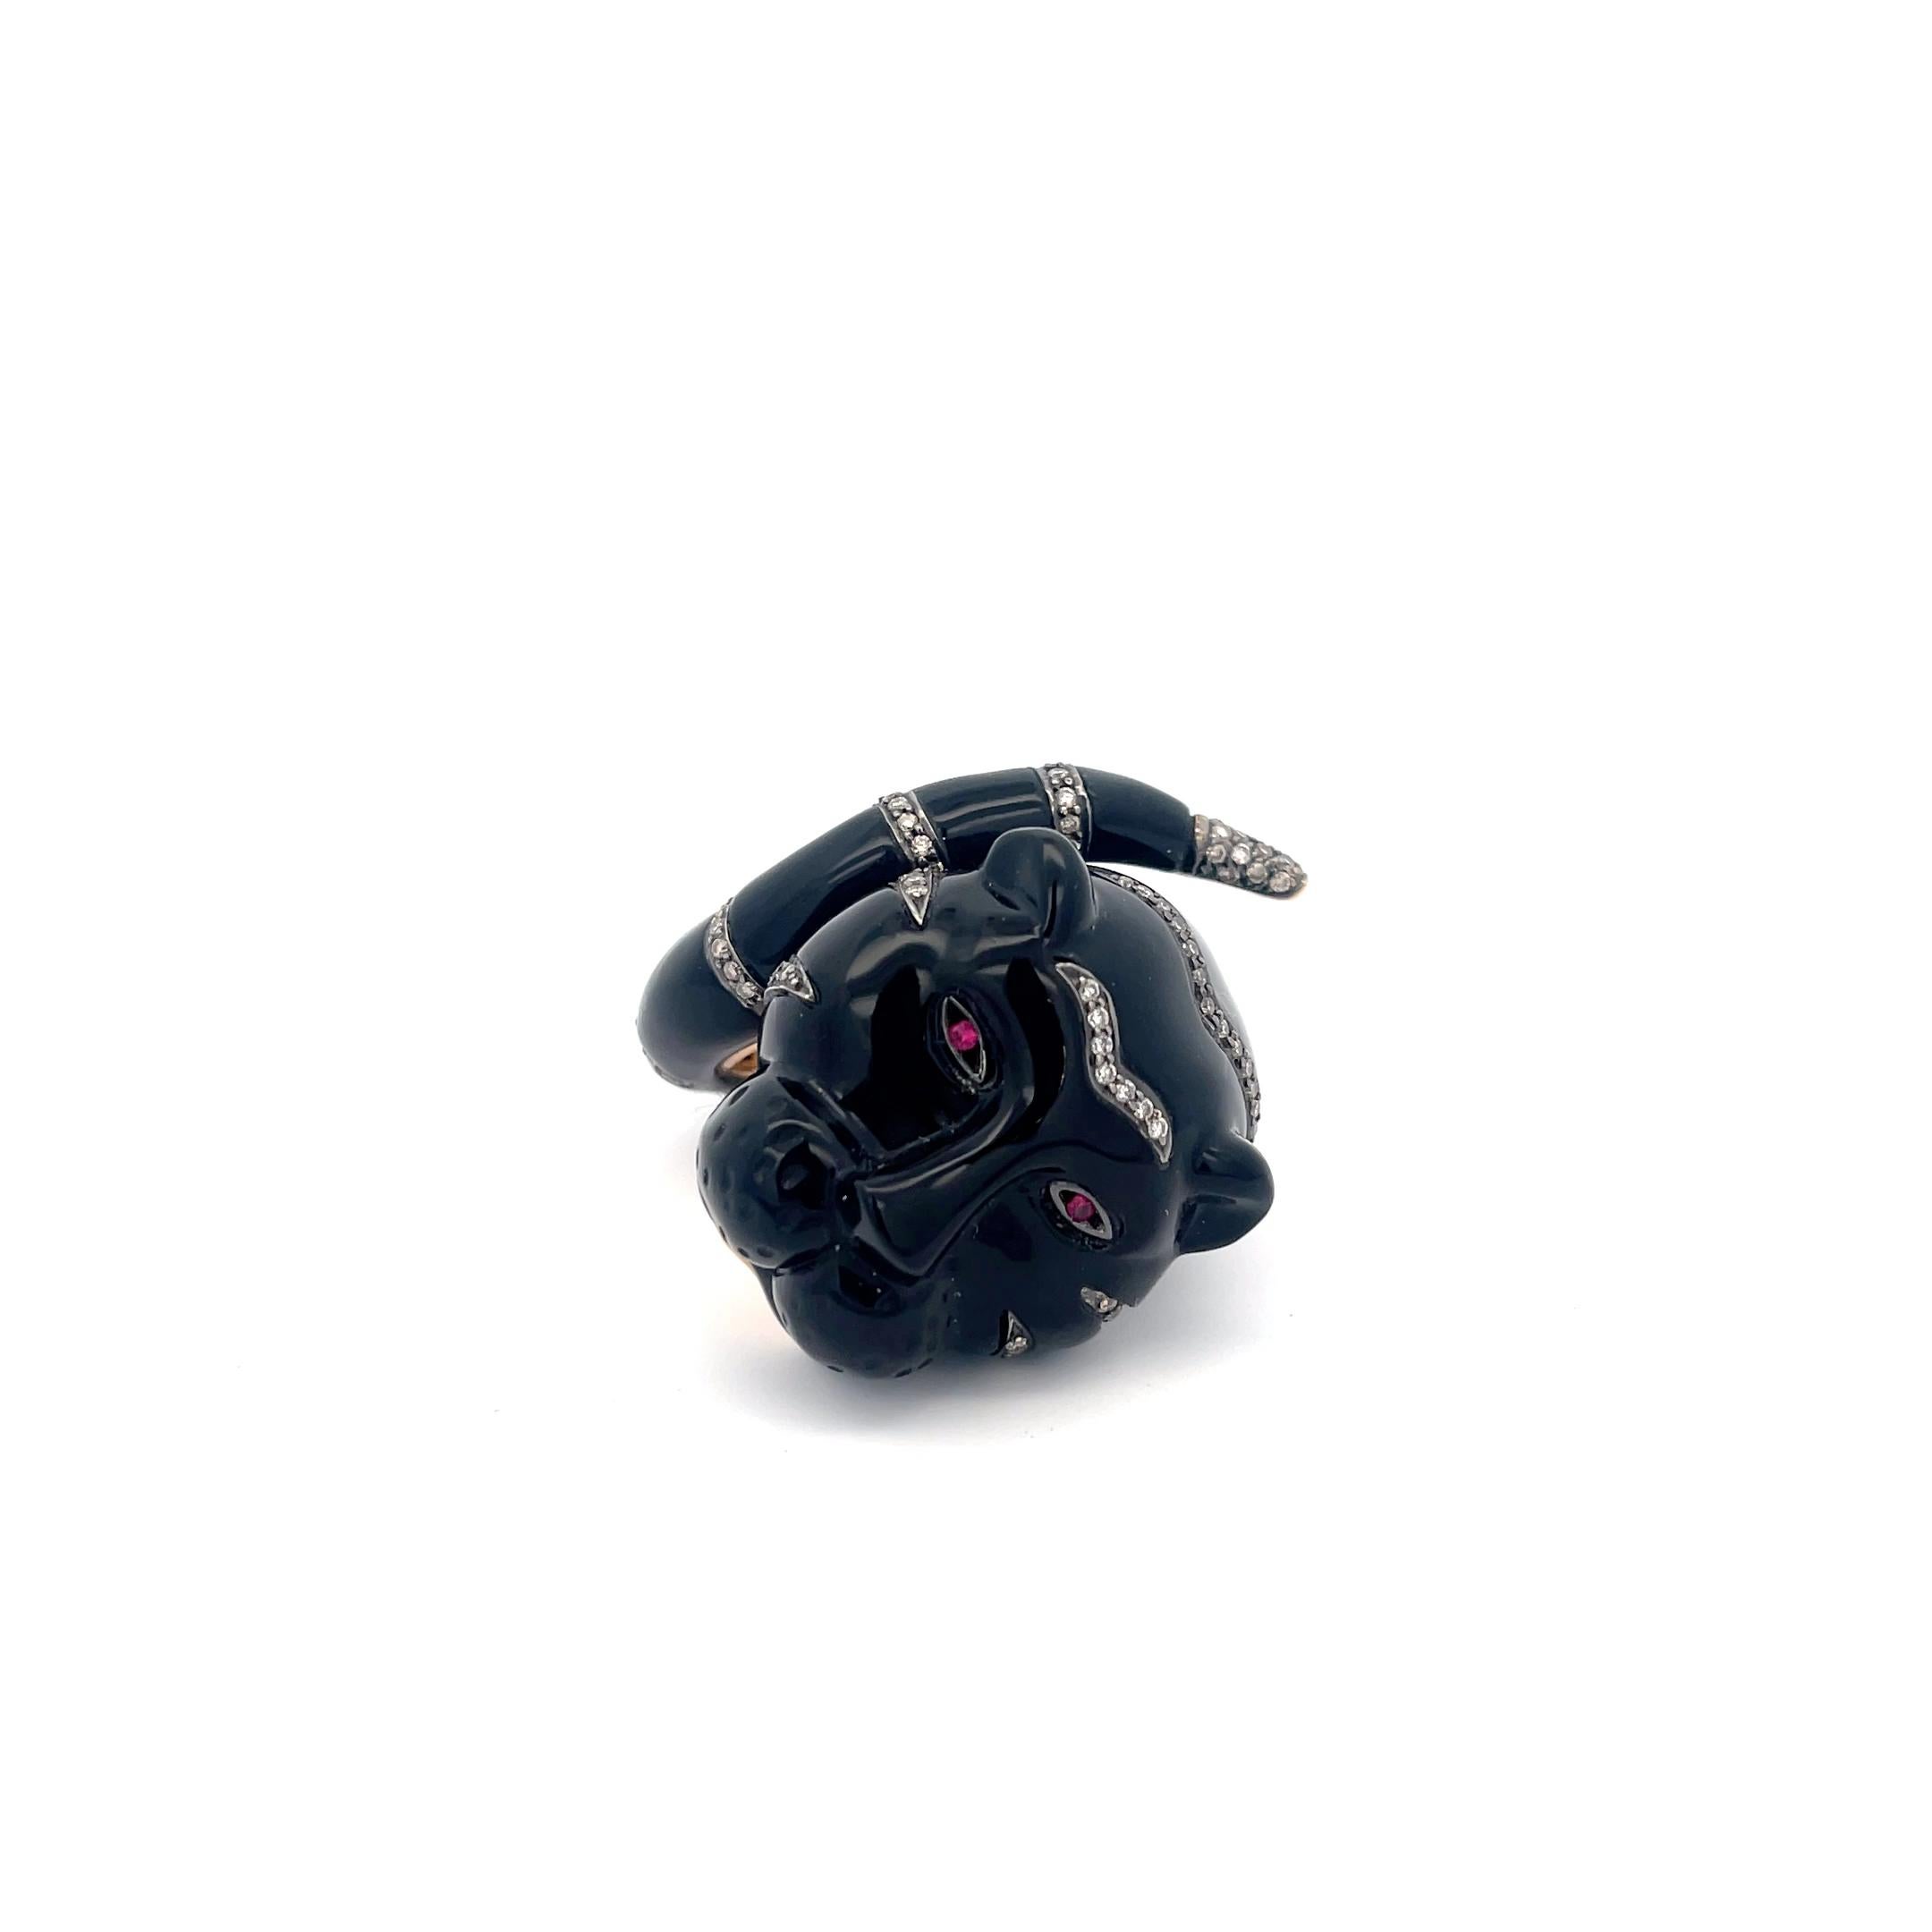 Onyx Panther and Diamond Ring in 18K Yellow Gold. Size 6

38.6 Grams
1.25